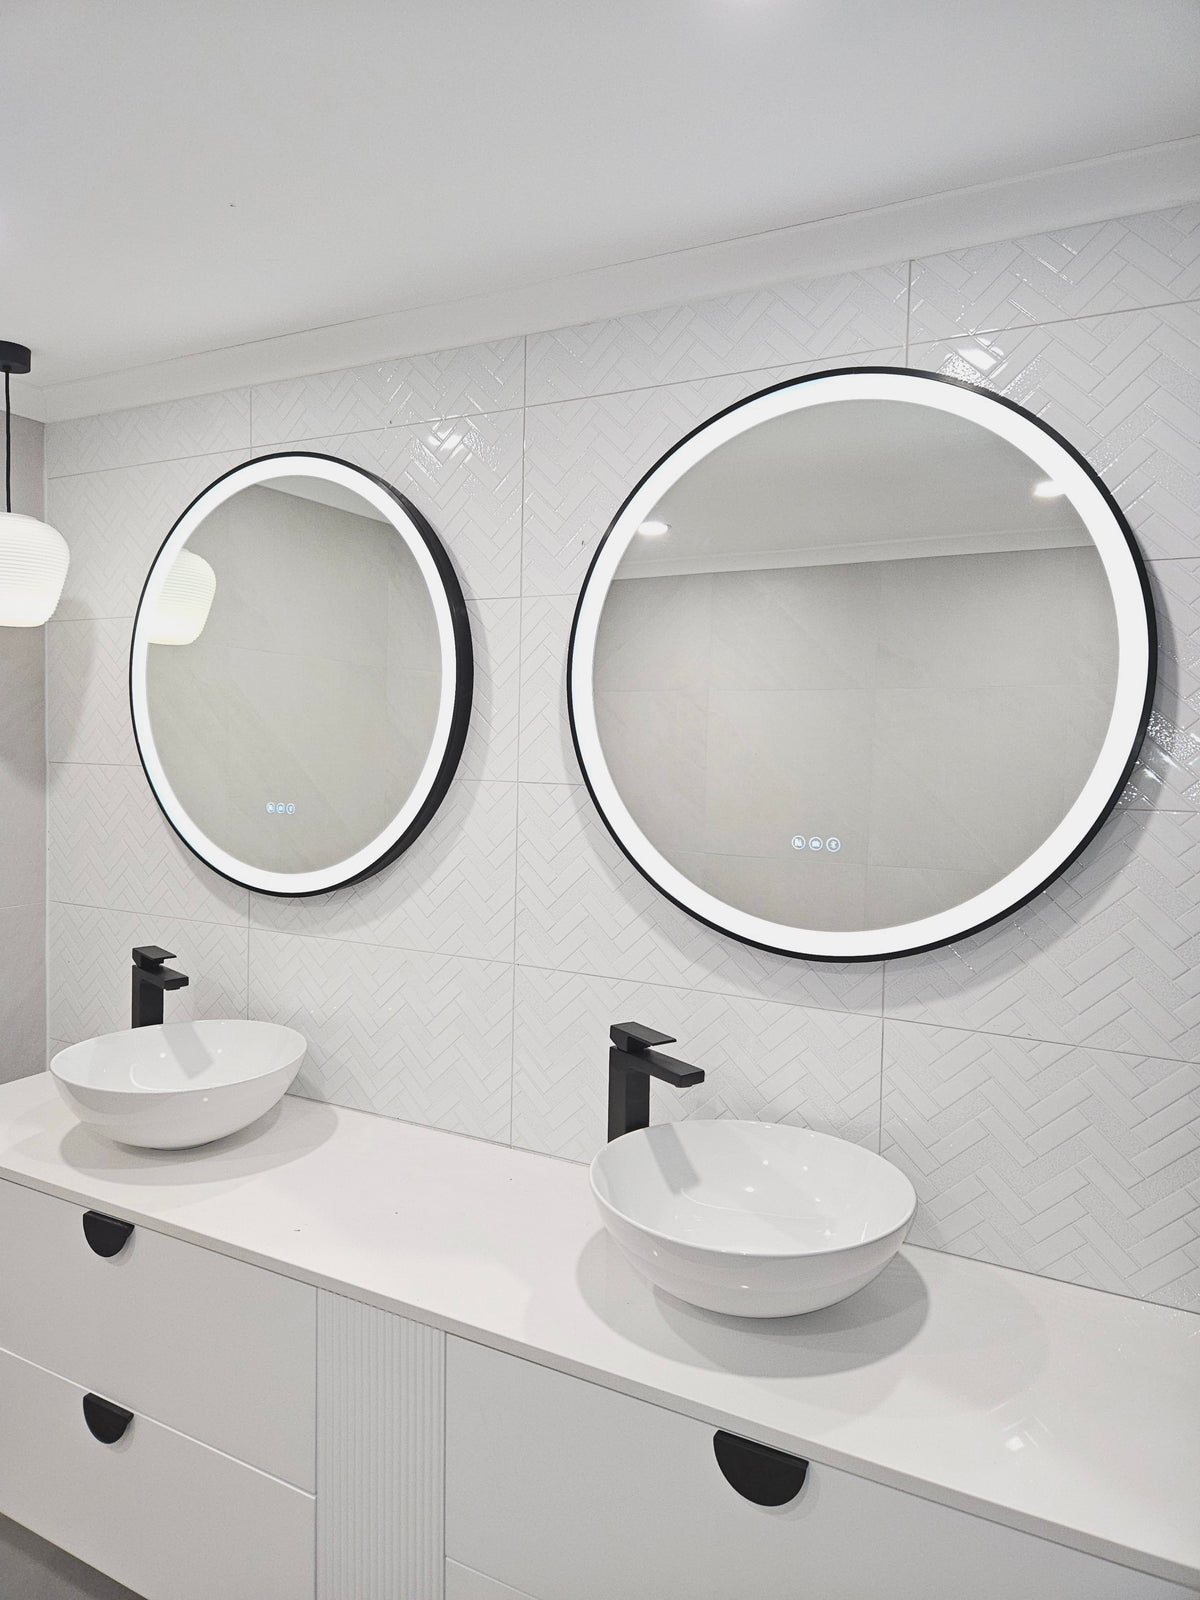 Dual Smart LED mirrors with black frames in an All-White bathroom with Black Contrasting Accents